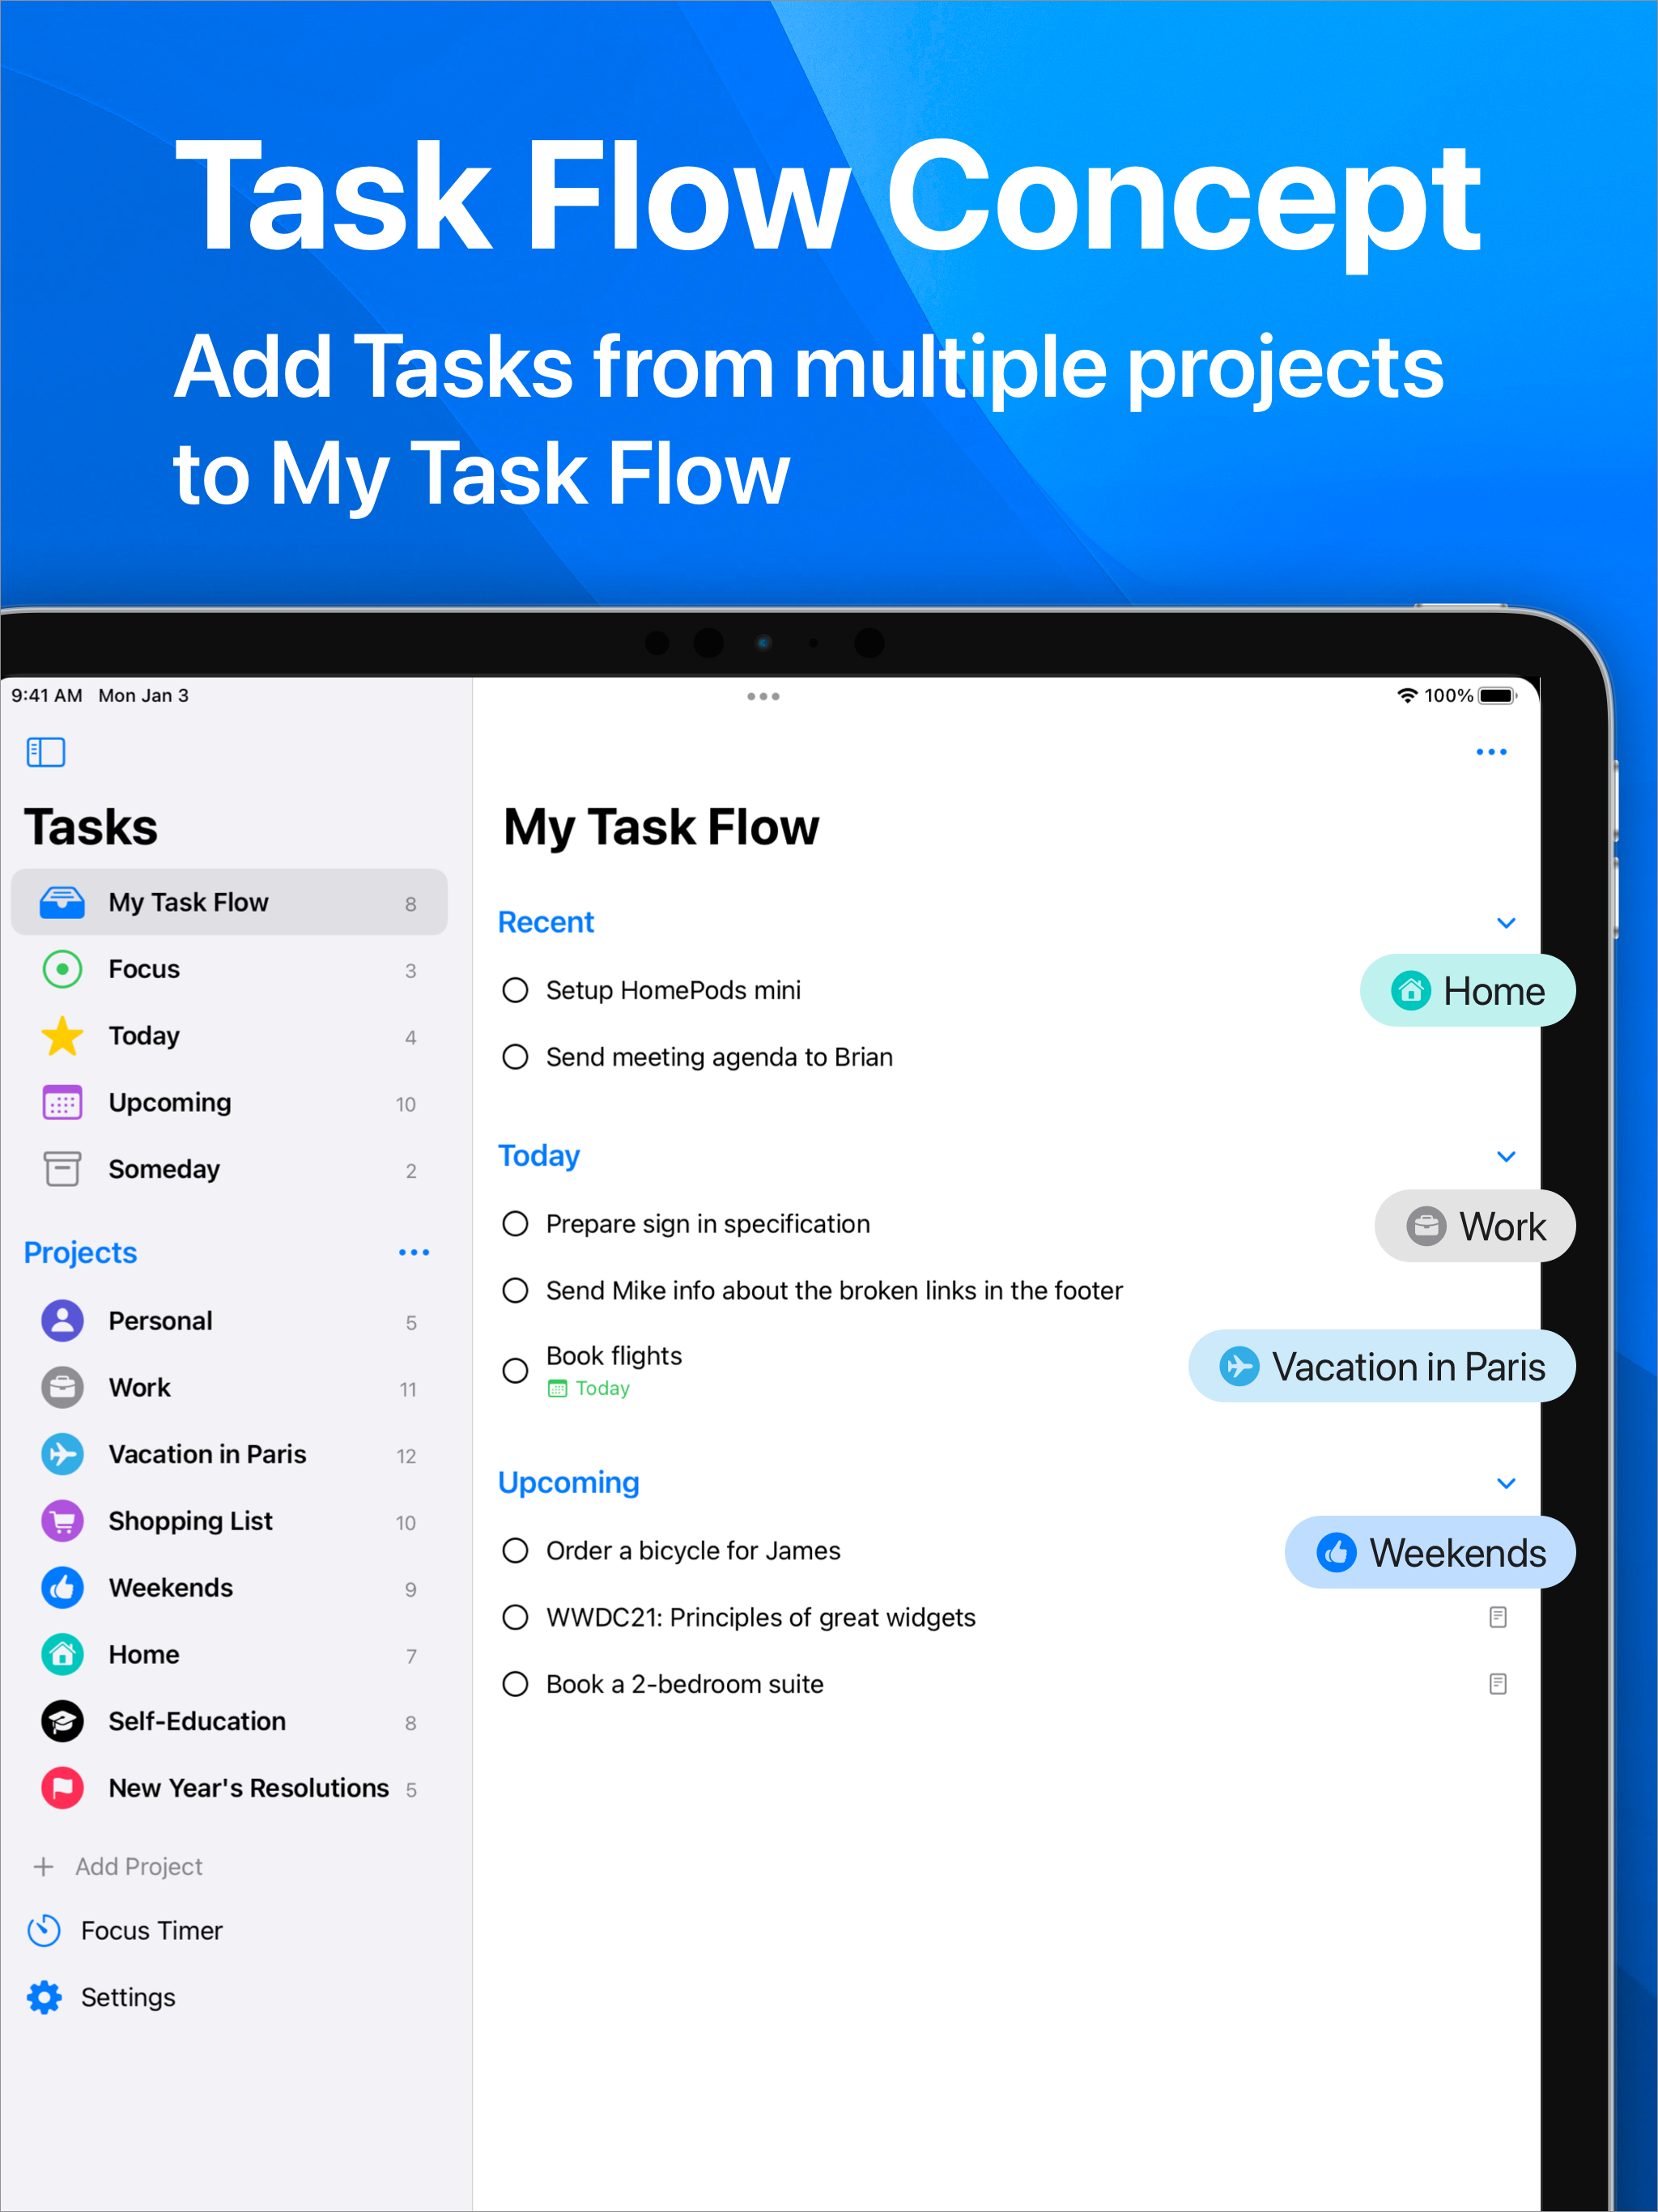 Add Tasks from multiple project to My Task Flow